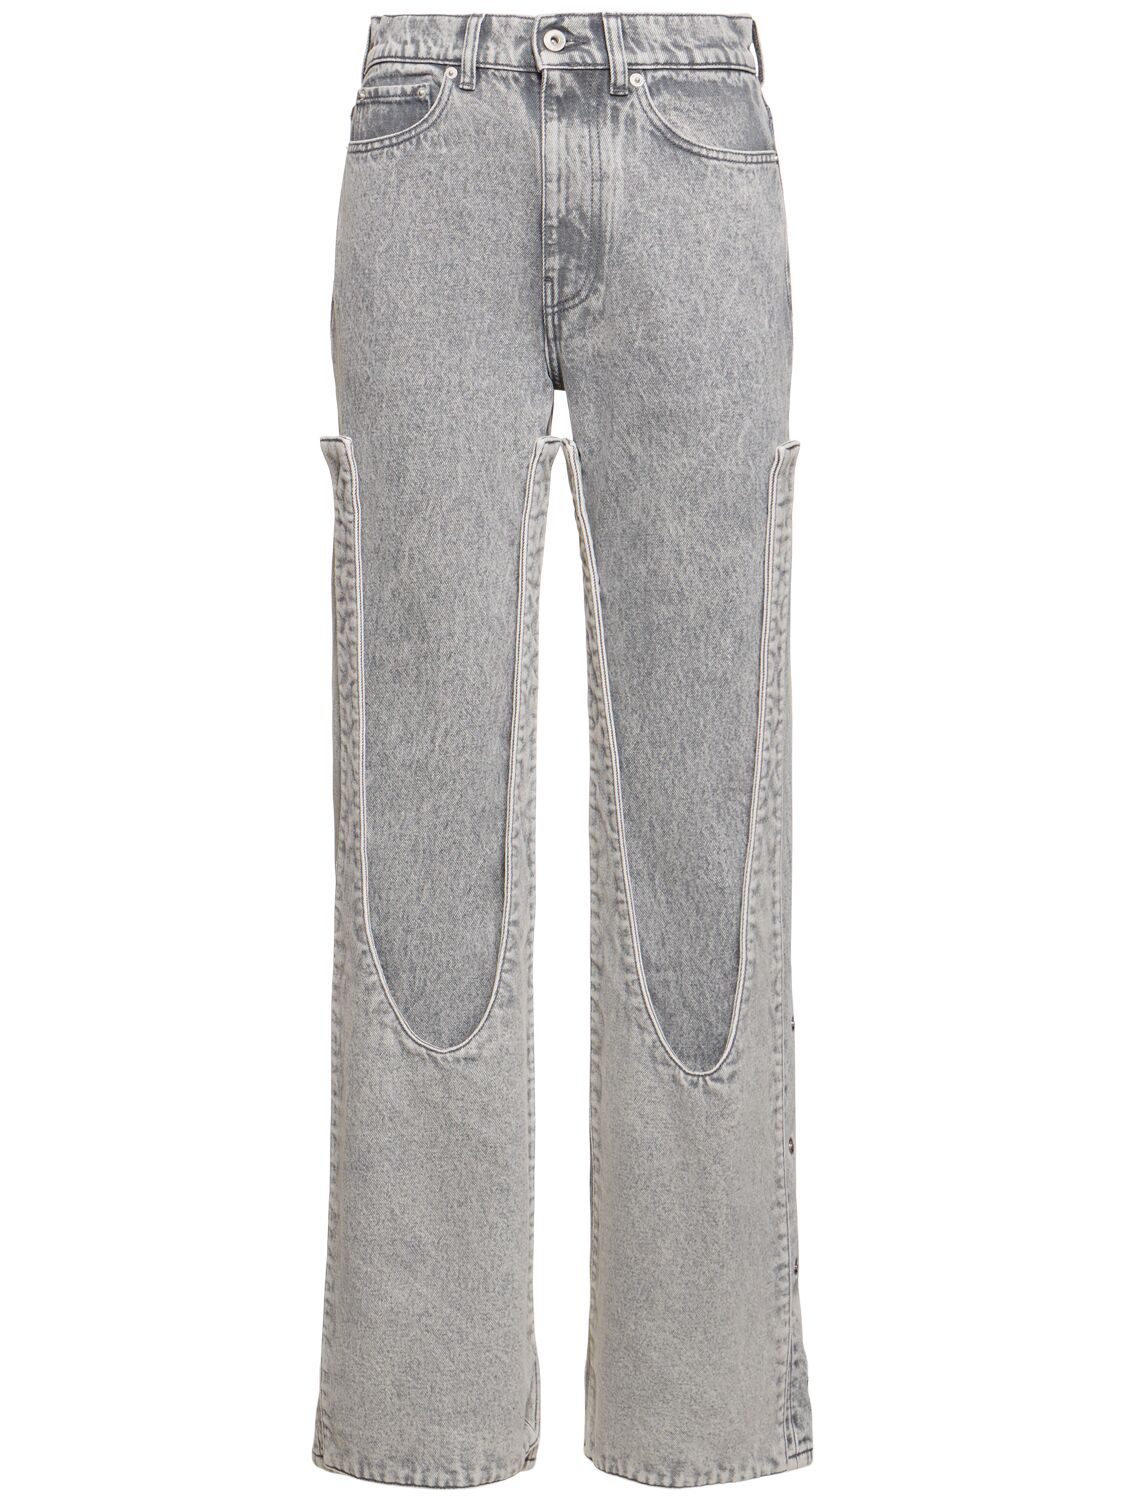 Y/project Denim Patchwork High Rise Flared Jeans In Gray